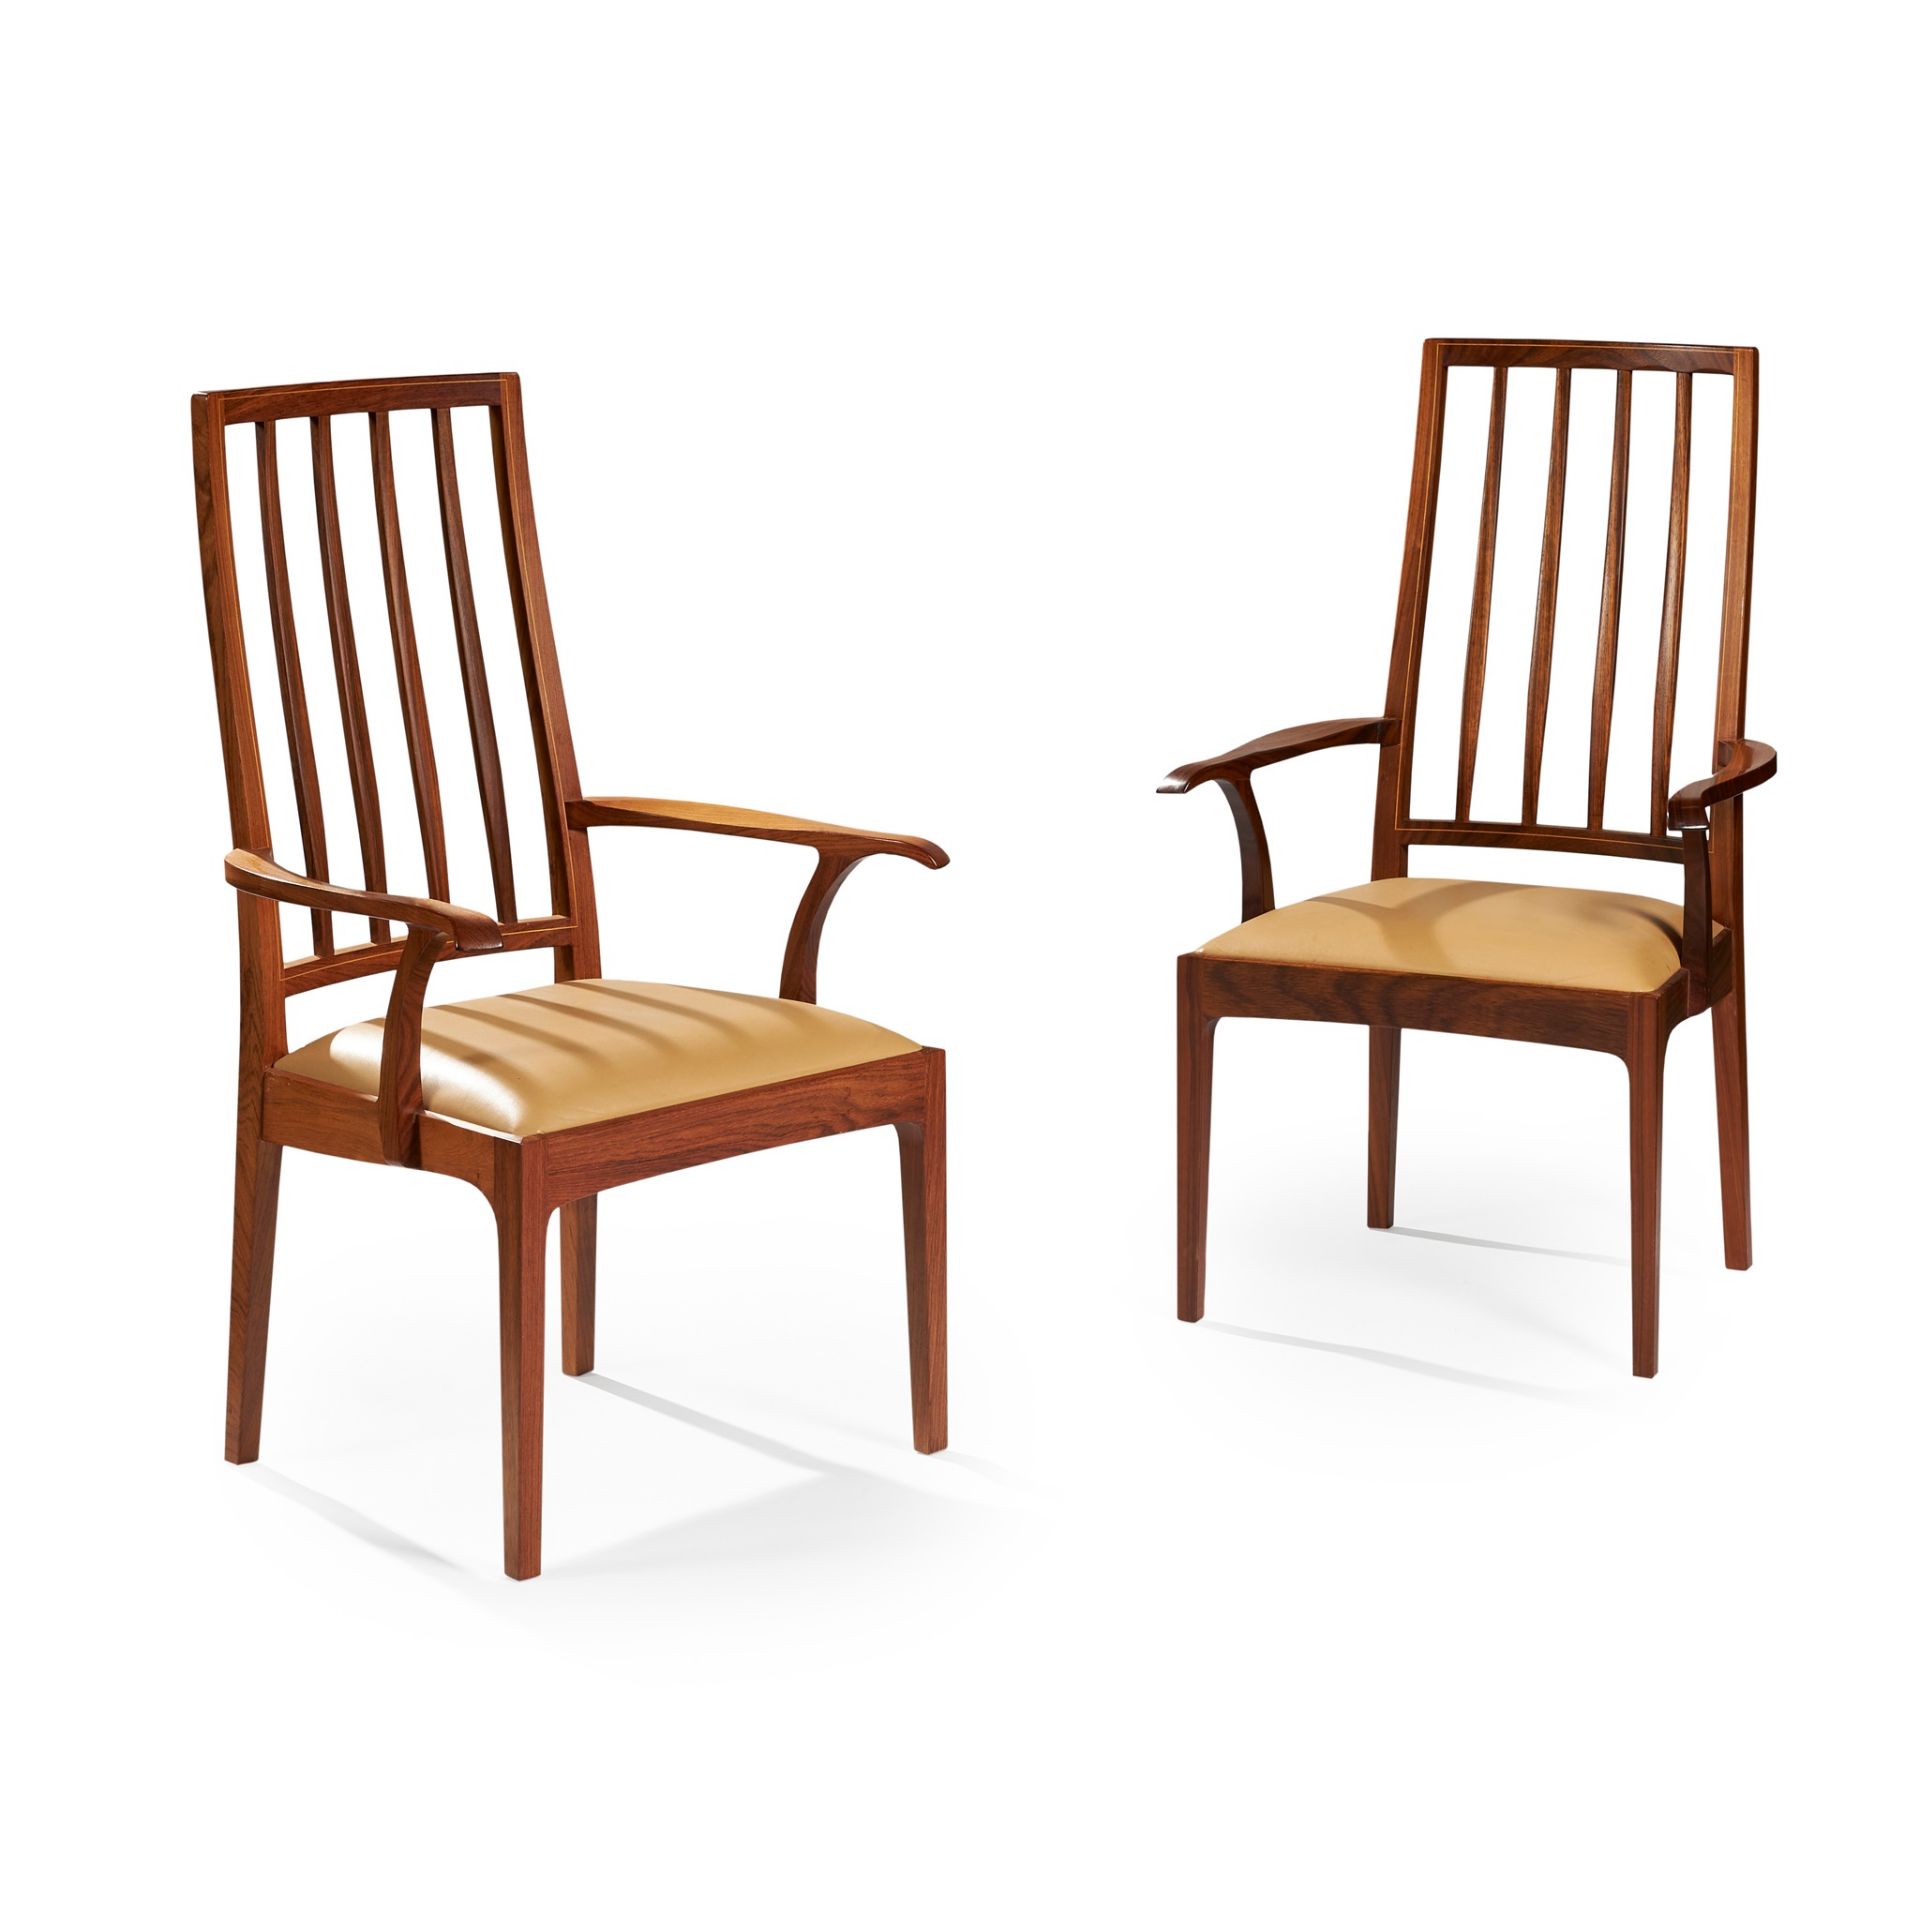 Y EDWARD BARNSLEY (1900-1987) SET OF TEN DINING CHAIRS, CIRCA 1981 - Image 2 of 2